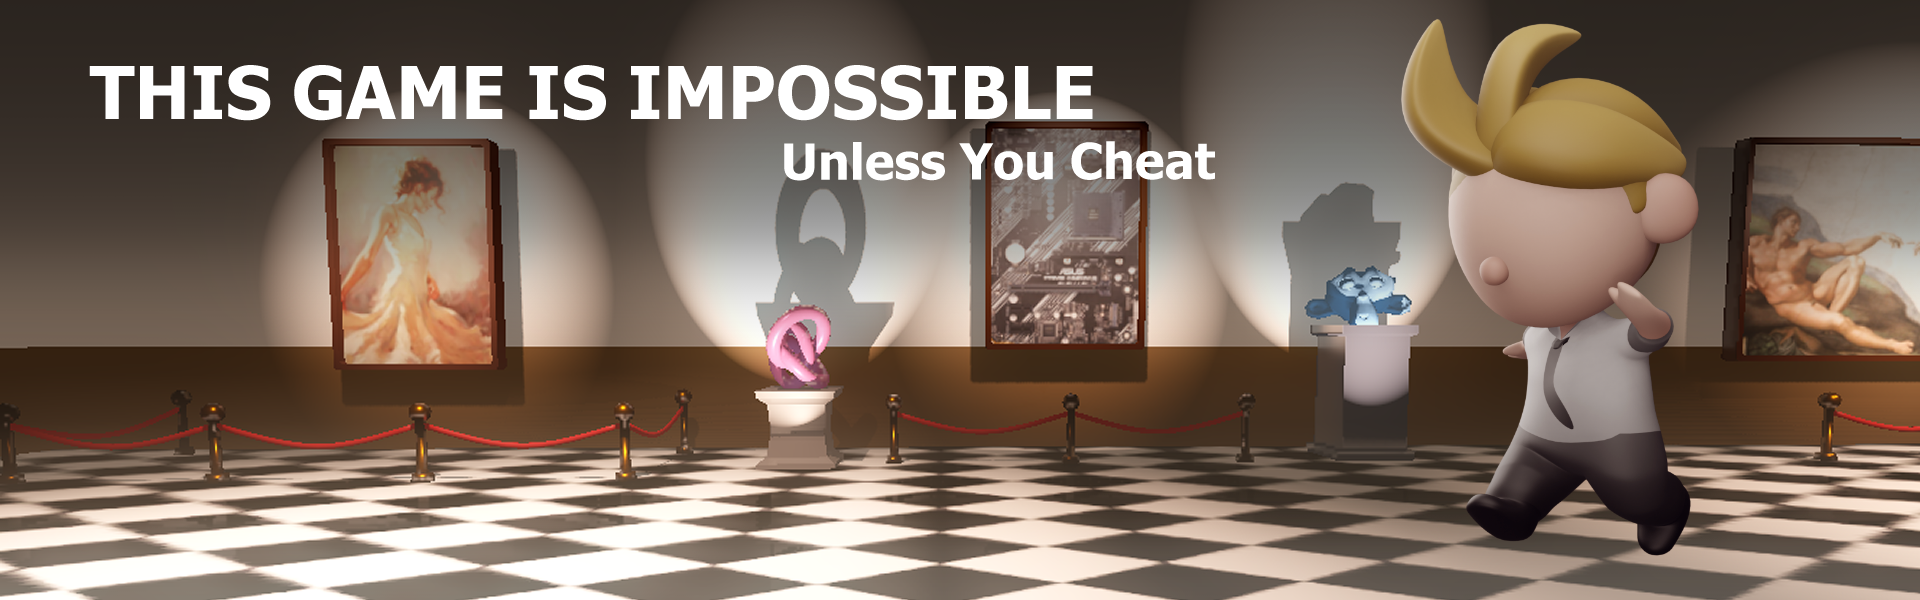 This Game is Impossible (Unless you Cheat)